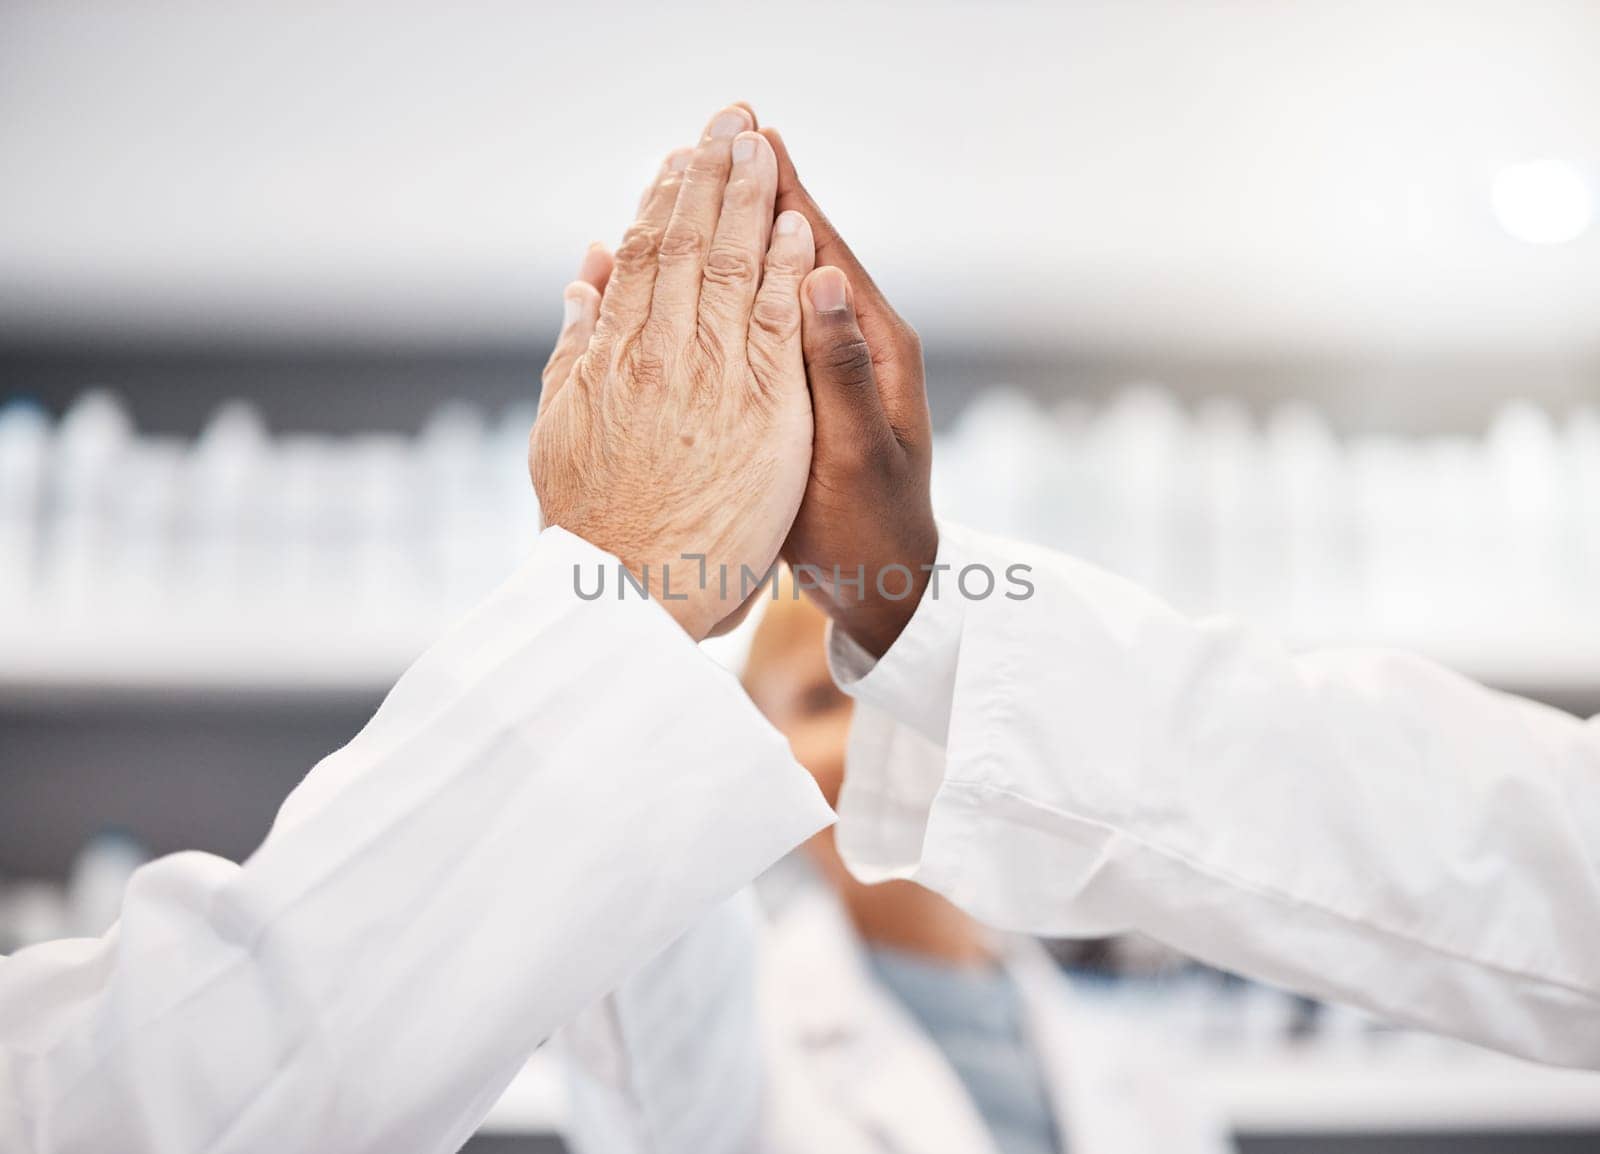 High five hands, scientist and group in lab for results, success or congratulations for pharma. Science teamwork, team building and motivation for research, medical innovation or pharmaceutical study.